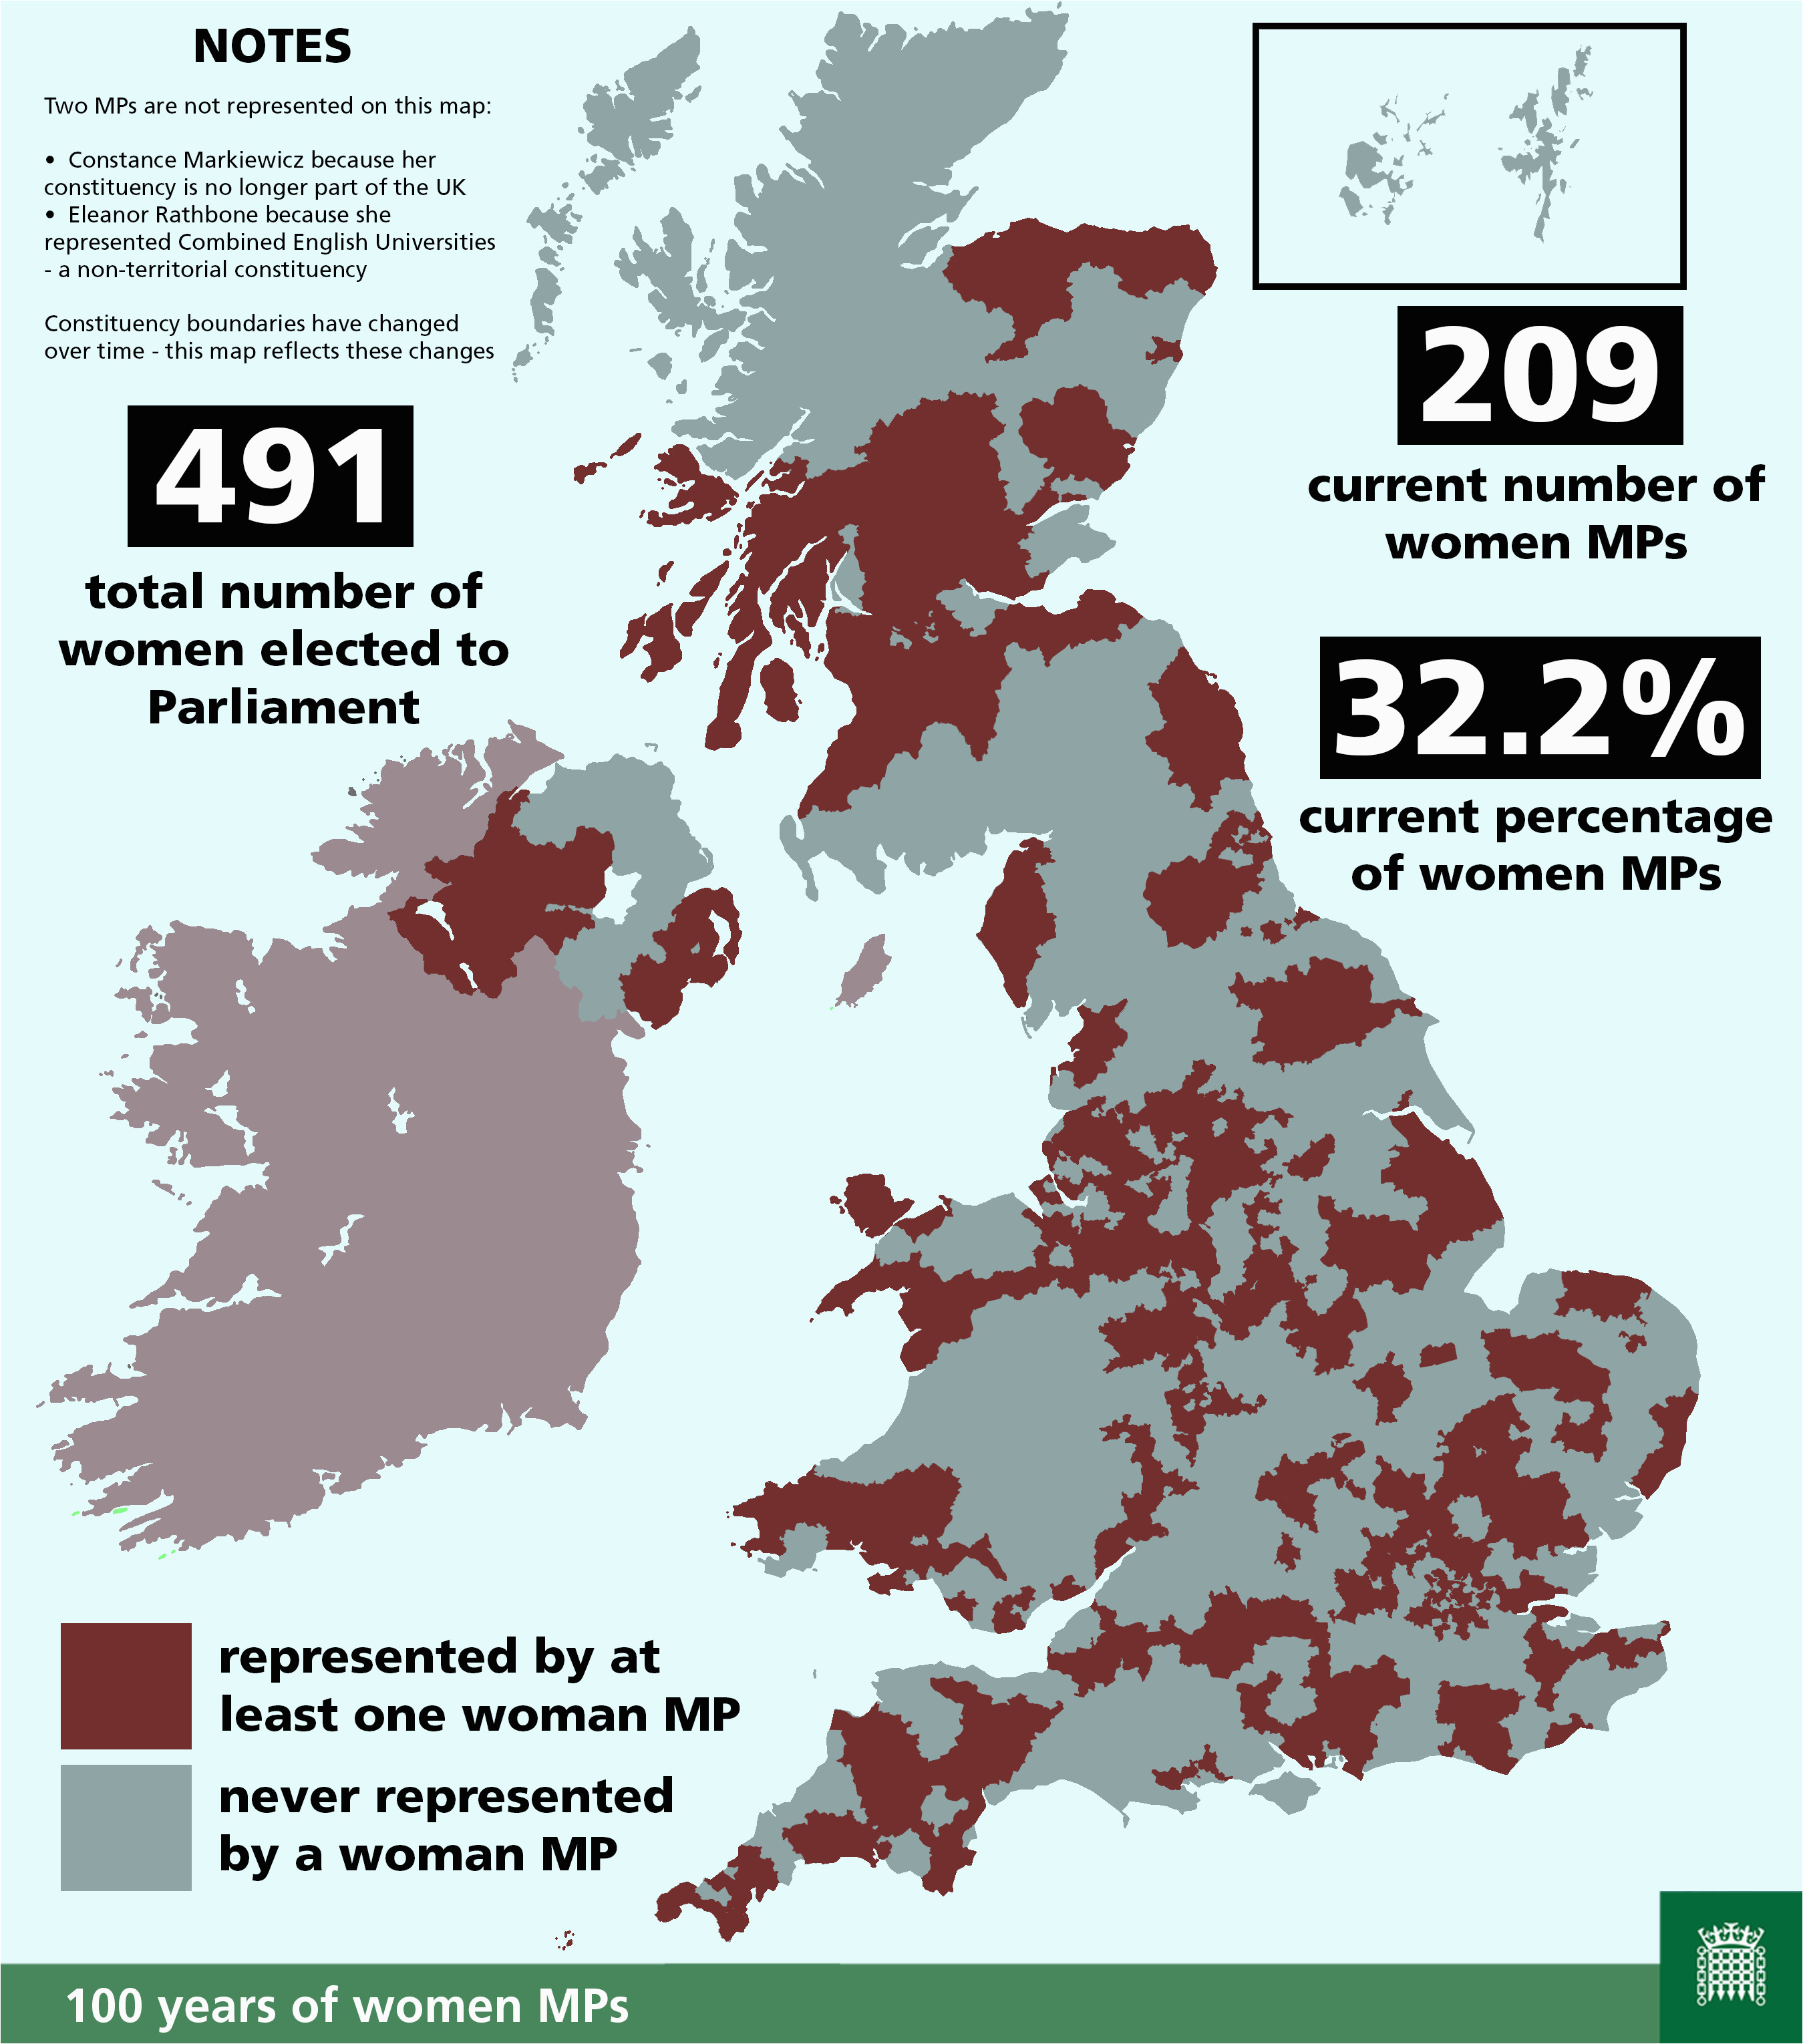 which areas of the uk have ever been represented by a woman member